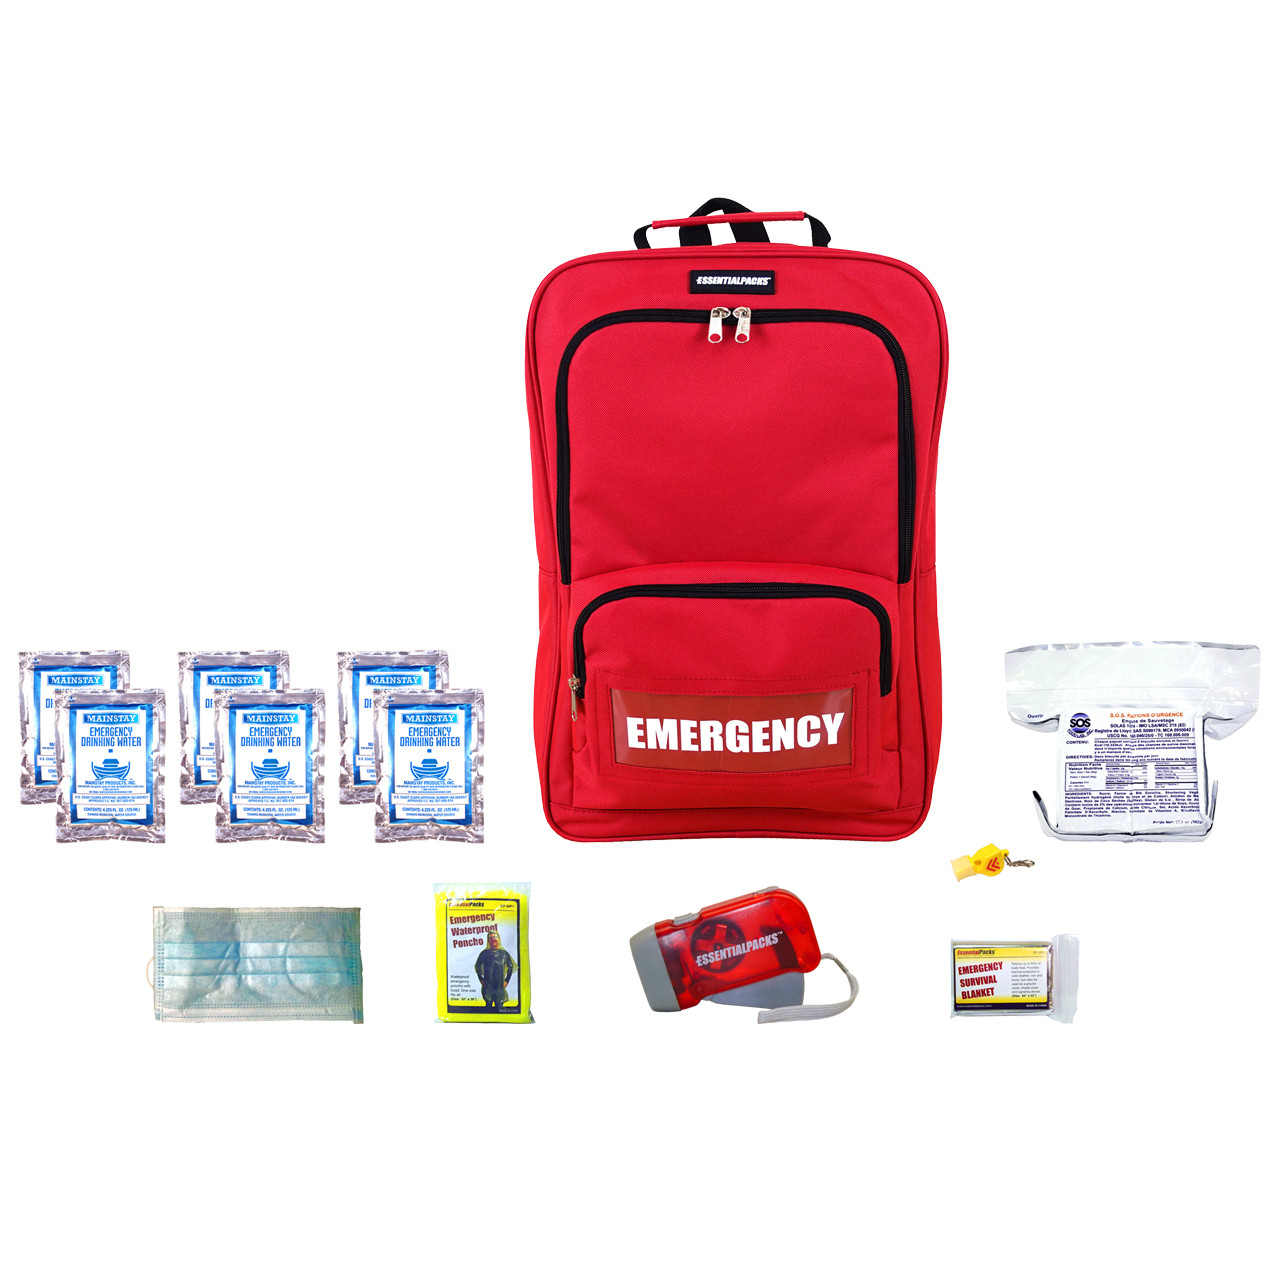 https://cdn11.bigcommerce.com/s-a8bv6/images/stencil/1280x1280/products/3726/8459/Standard_Emergency_Kit_-_1_Person_-_Red_-_Contents__97286.1676059081.jpg?c=2